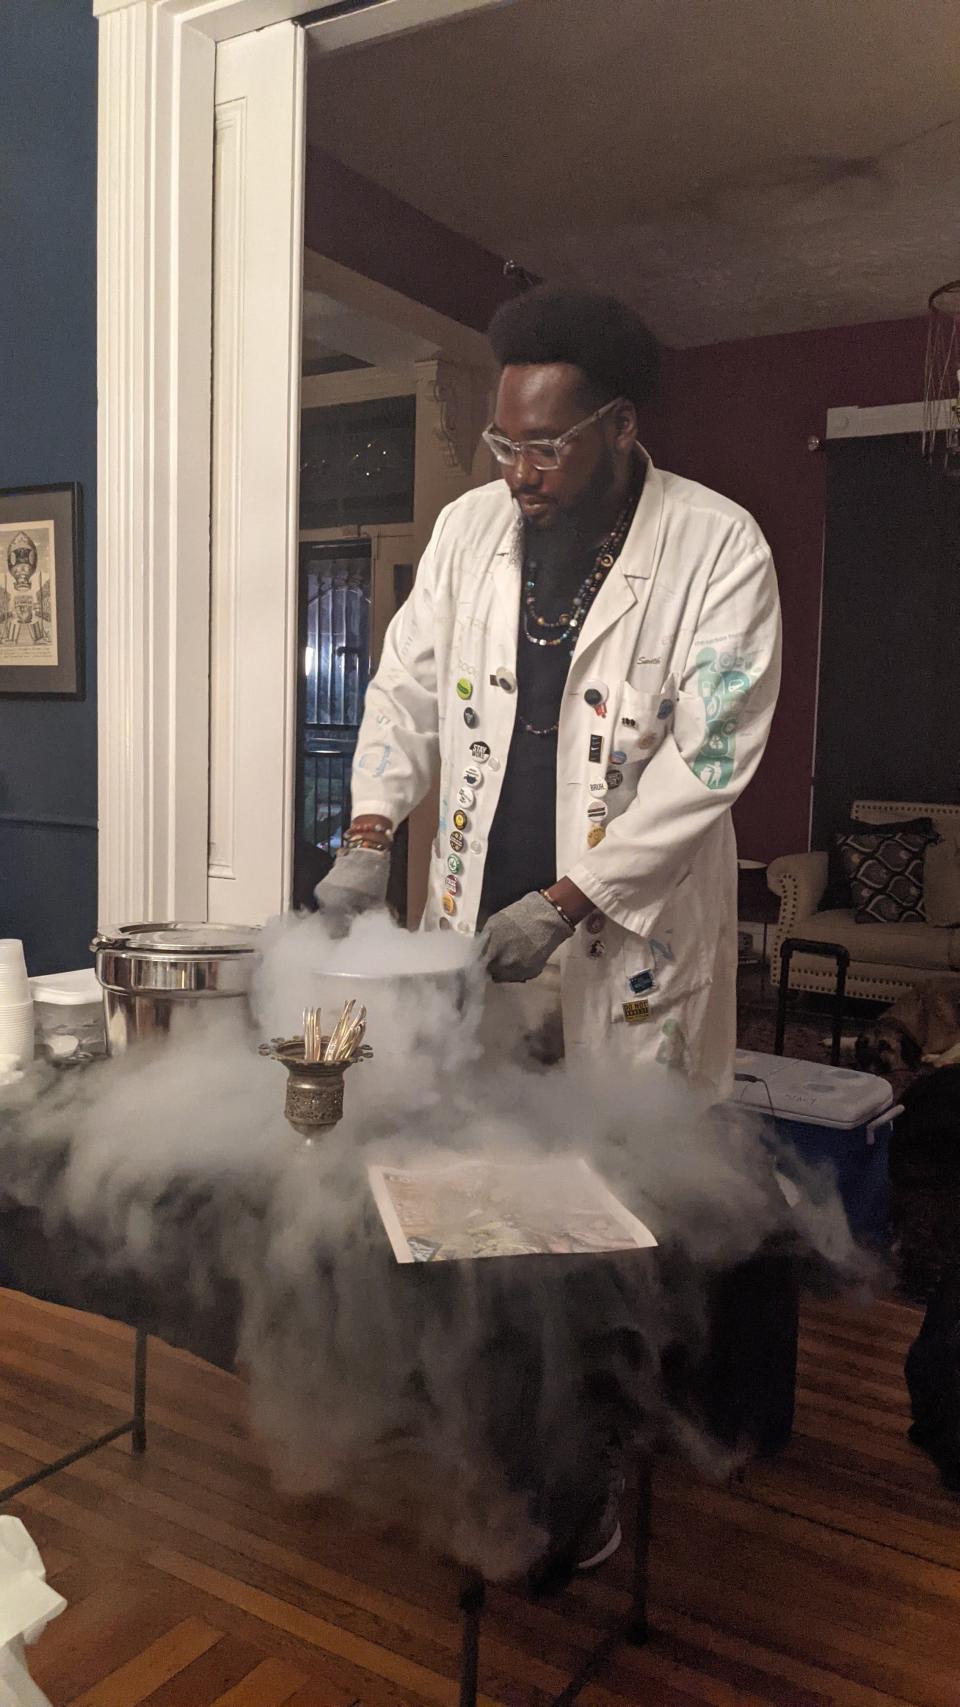 S.T.E.A.M. chemist Jerald Smith with NICE Cream hosted an ice cream show at the home of Courier Journal dining columnist Dana McMahan.